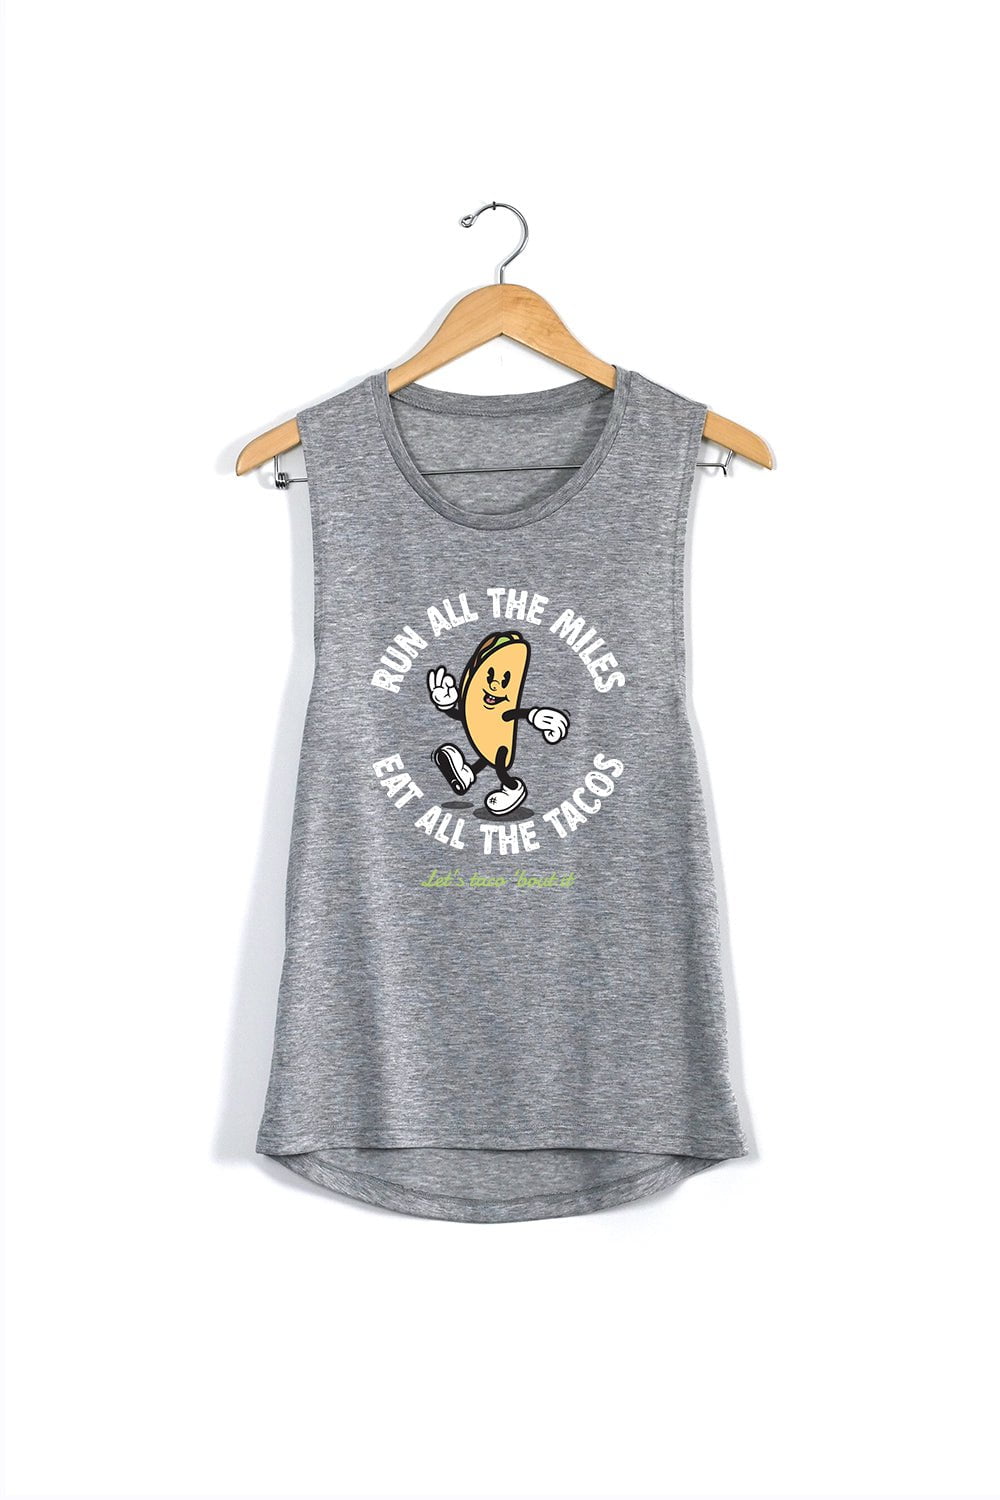 Sarah Marie Design Studio Small / Grey Run All The Miles, Eat All The Tacos Muscle Tank